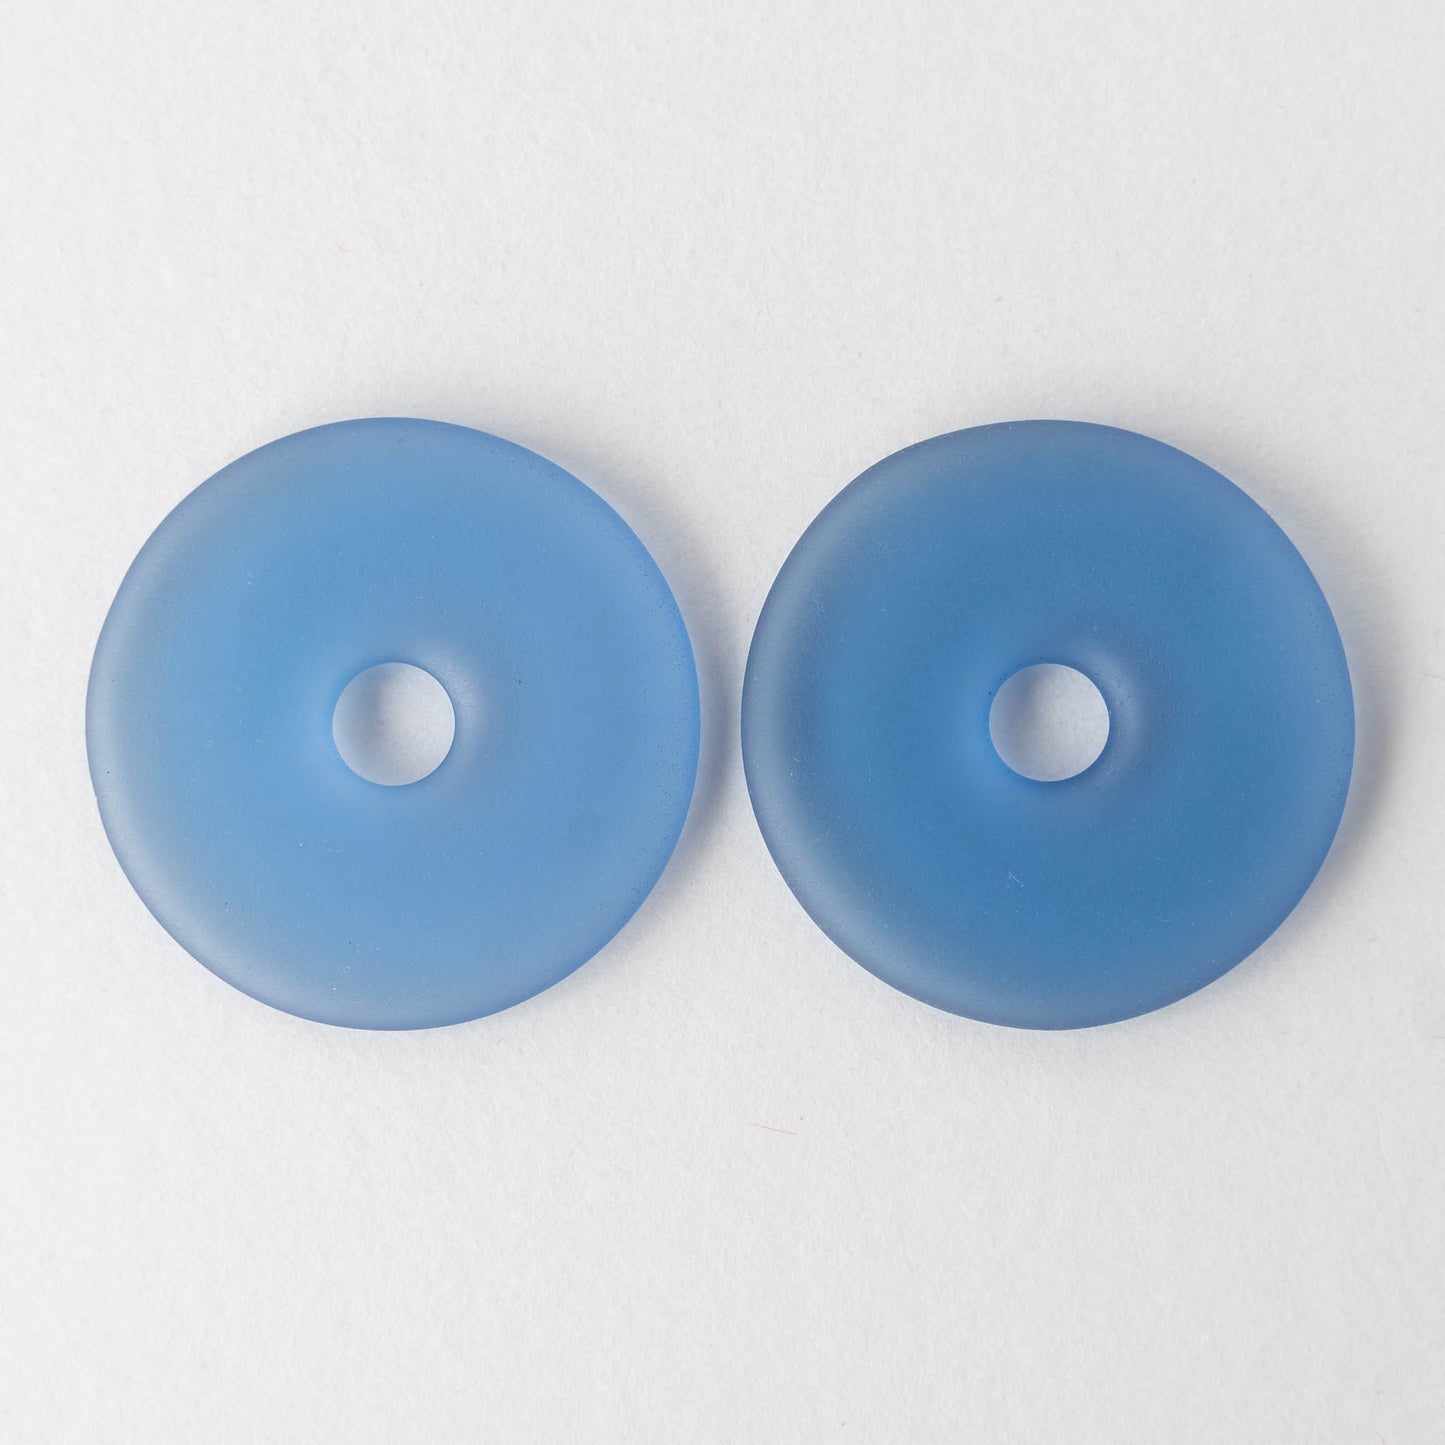 34mm Frosted Glass Donut - Sapphire Blue - 1 Donut